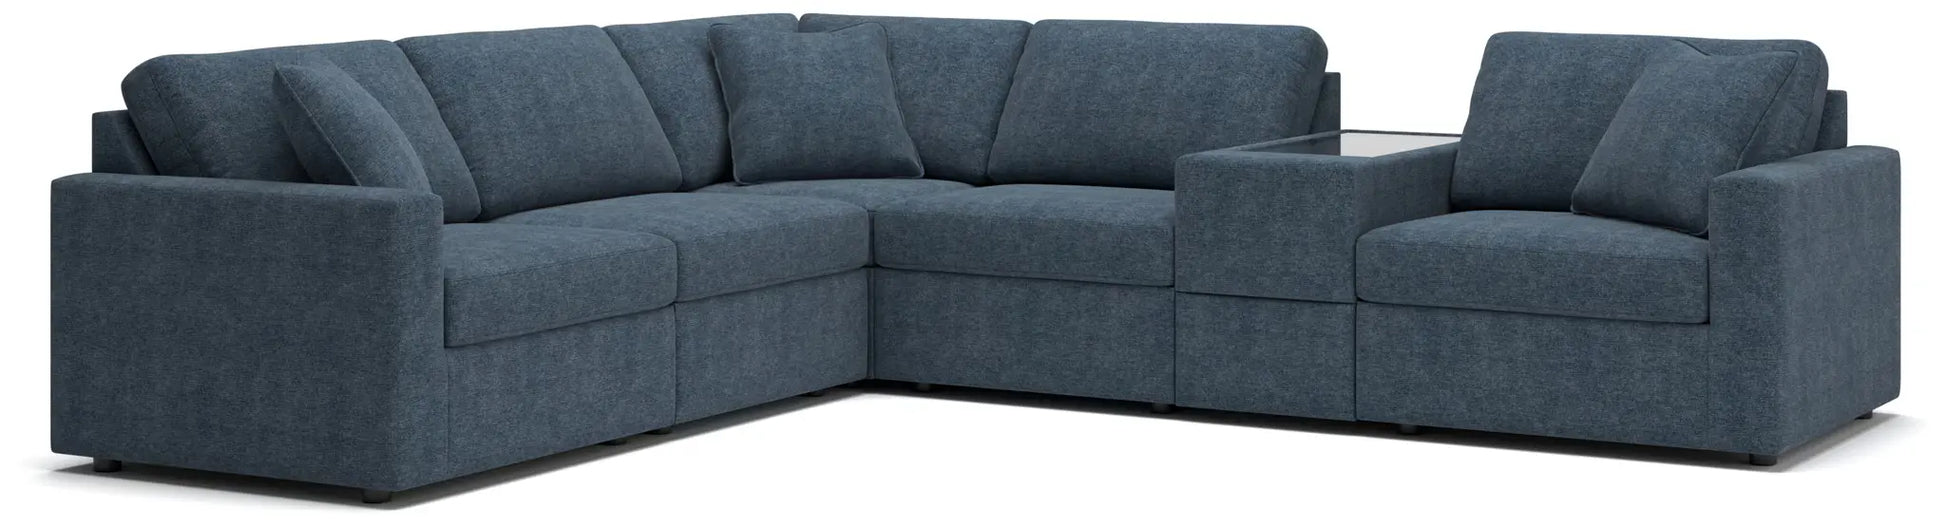 Modmax - Ink - 6-Piece Sectional With Storage Console